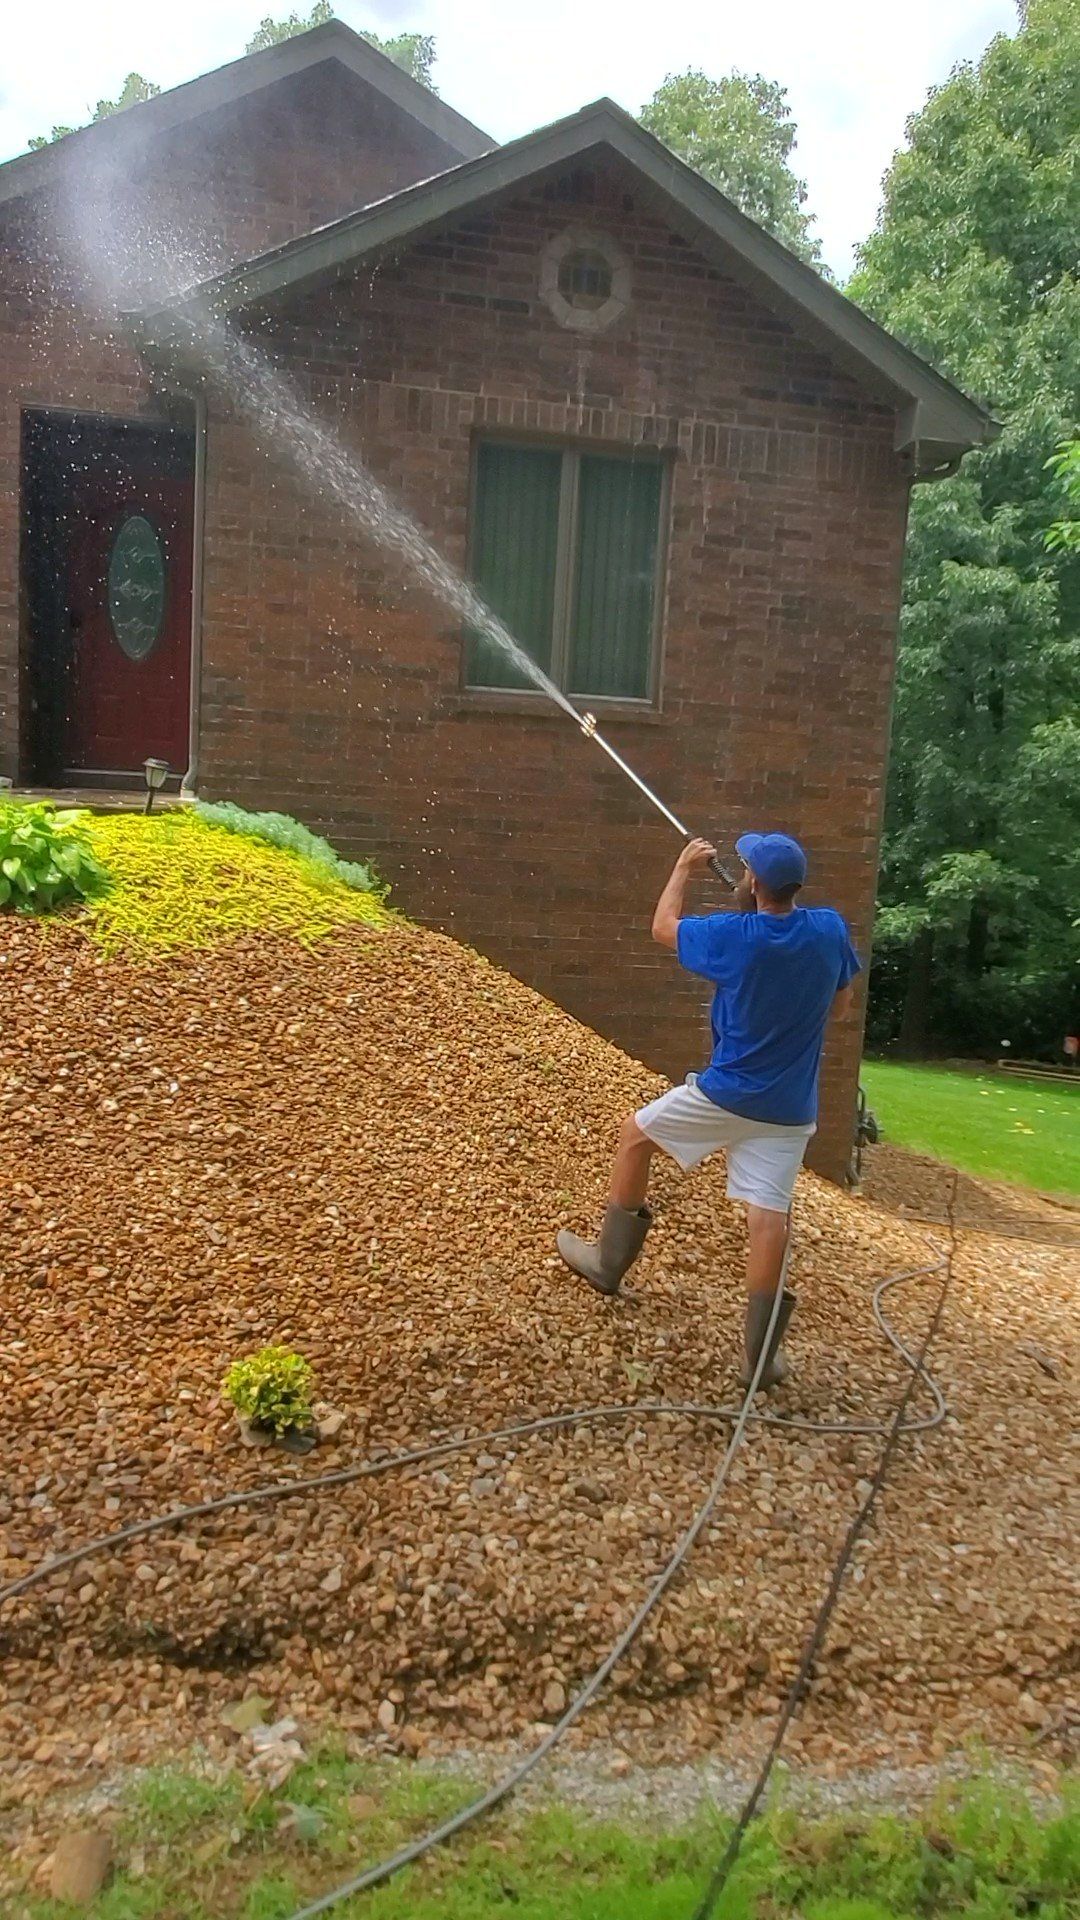 A man is using a high pressure washer to clean the sidewalk in front of a brick house.